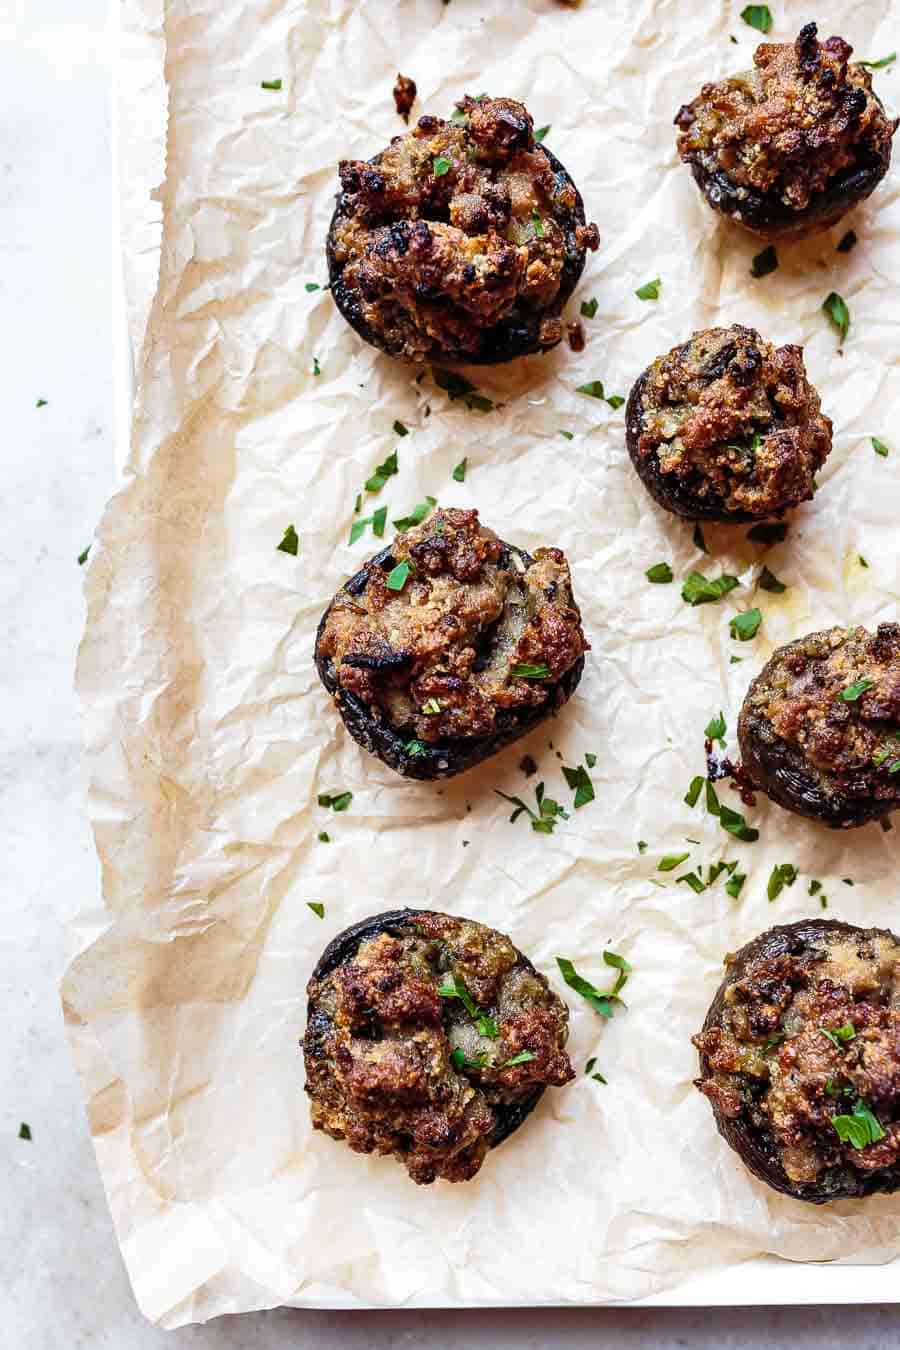 View from above of 7 baked sausage stuffed mushrooms sitting on a piece of parchment paper. The mushroom cap is facing down and they have been garnished with some fresh herbs.